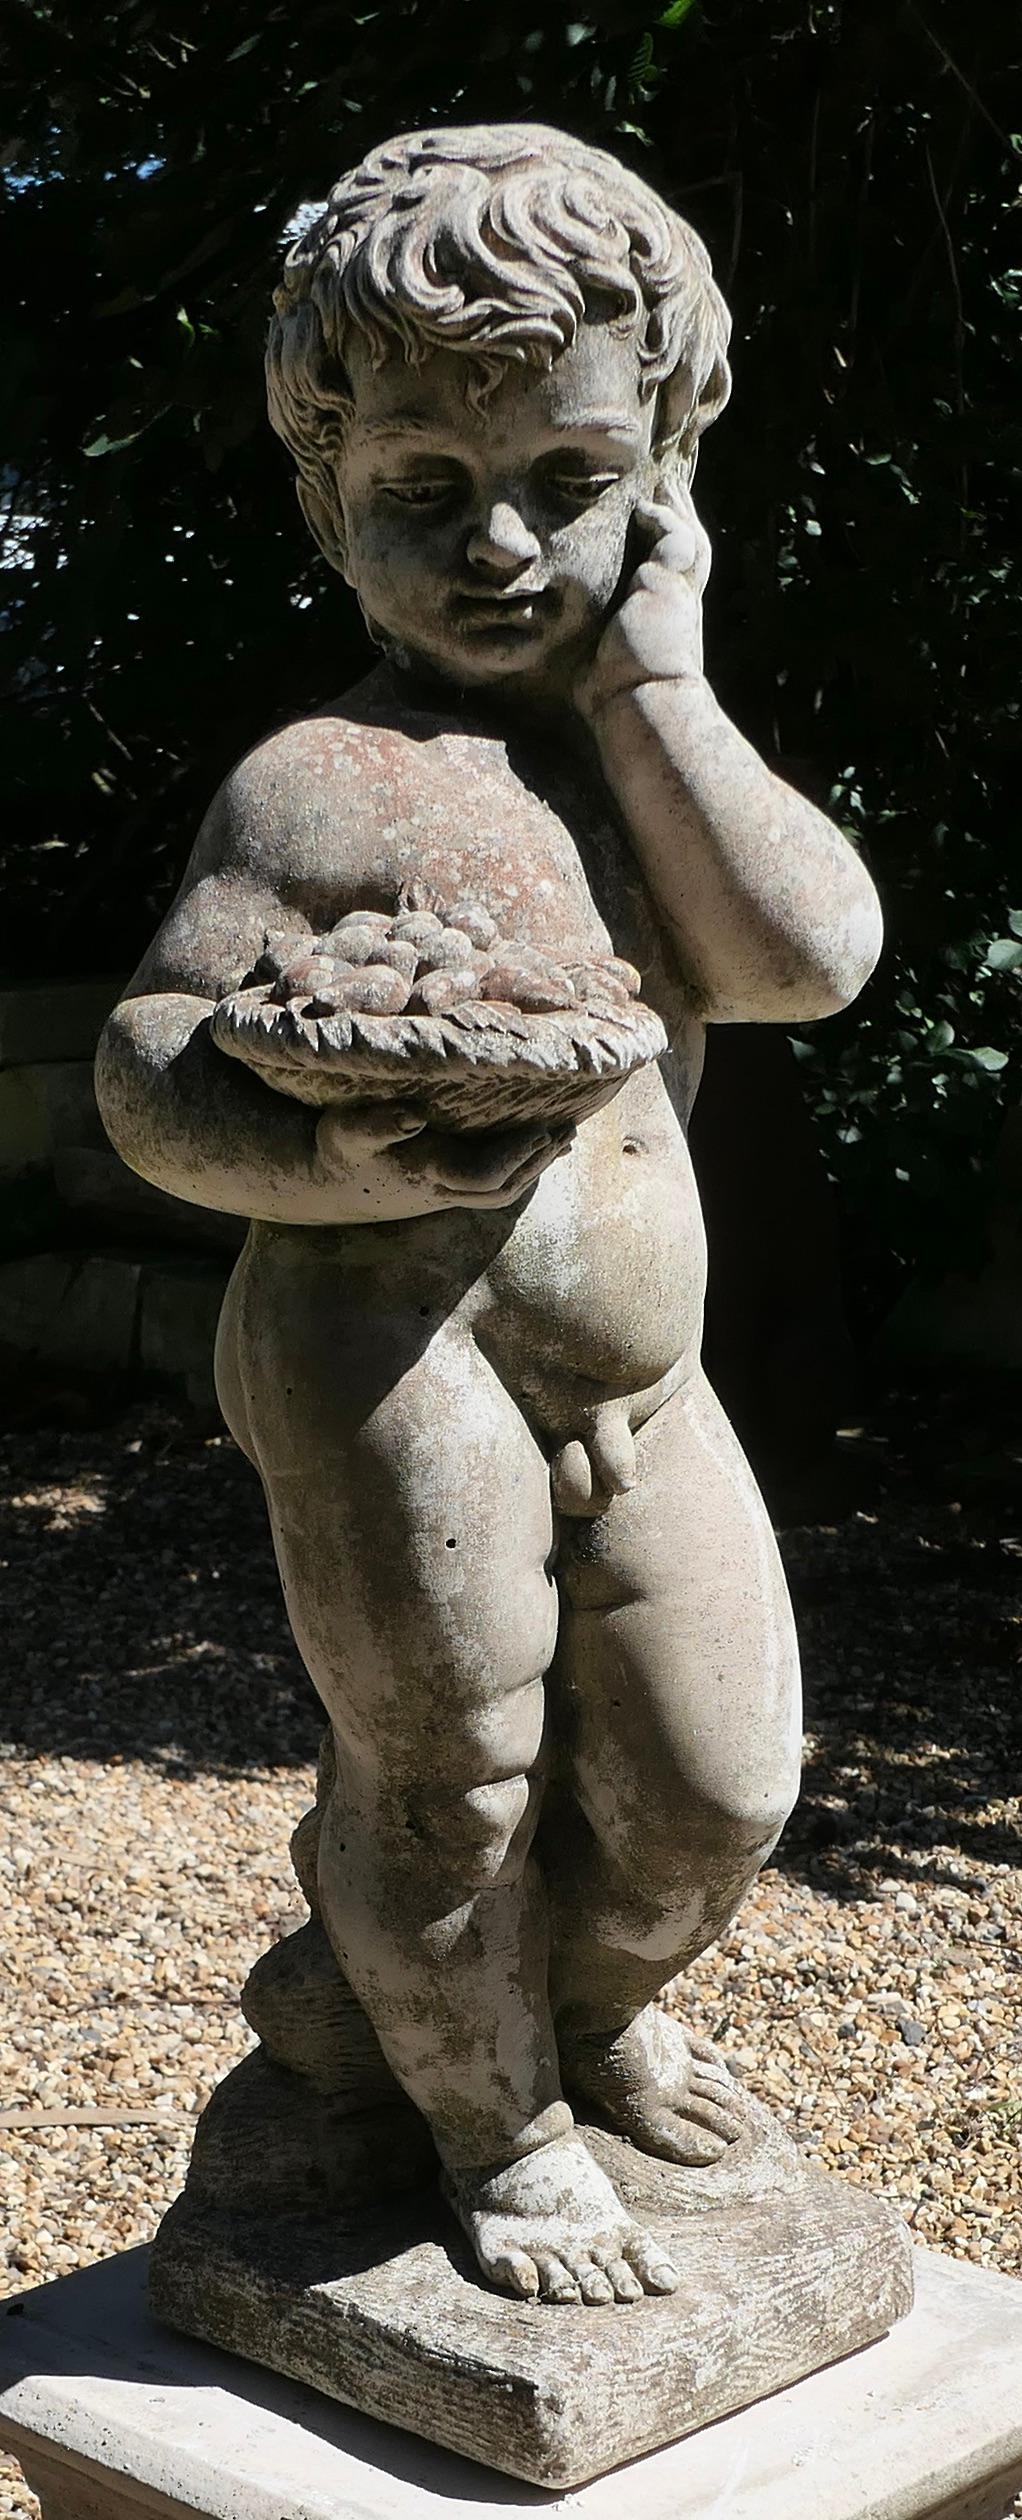 Cast Stone An Old Weathered Nude Boy Garden Statue   This is a lovely old statue of a boy  